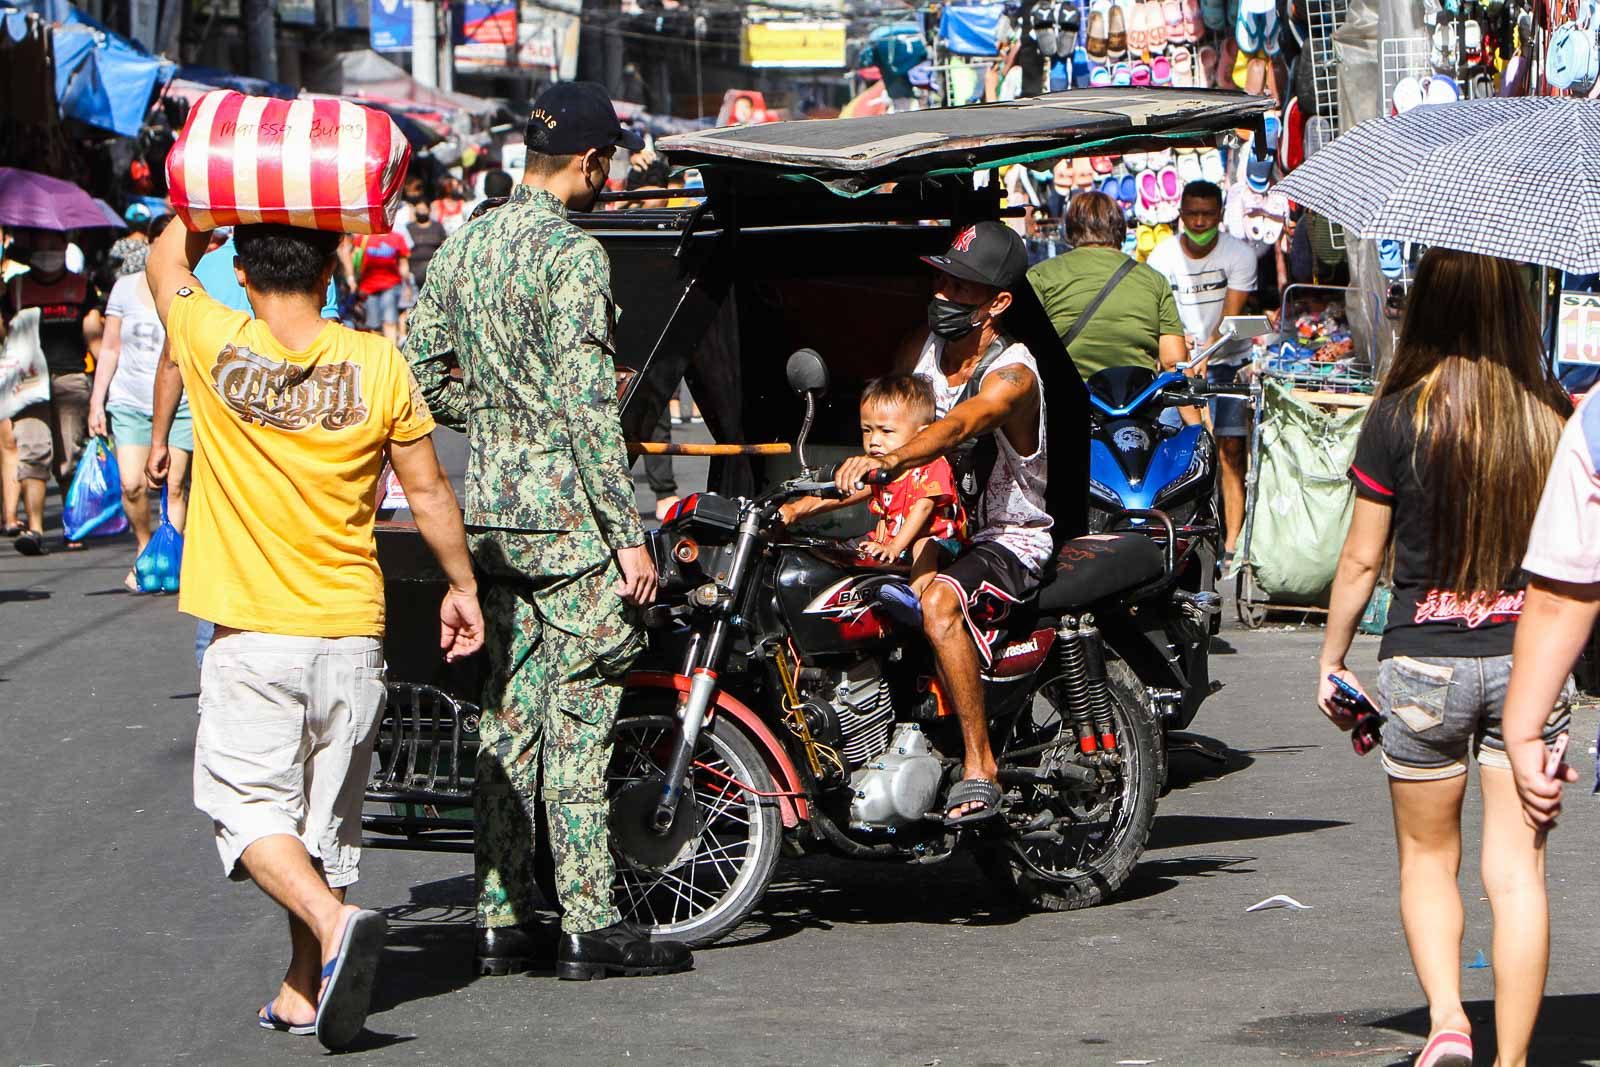 Philippines records all-time high 39,004 COVID-19 cases